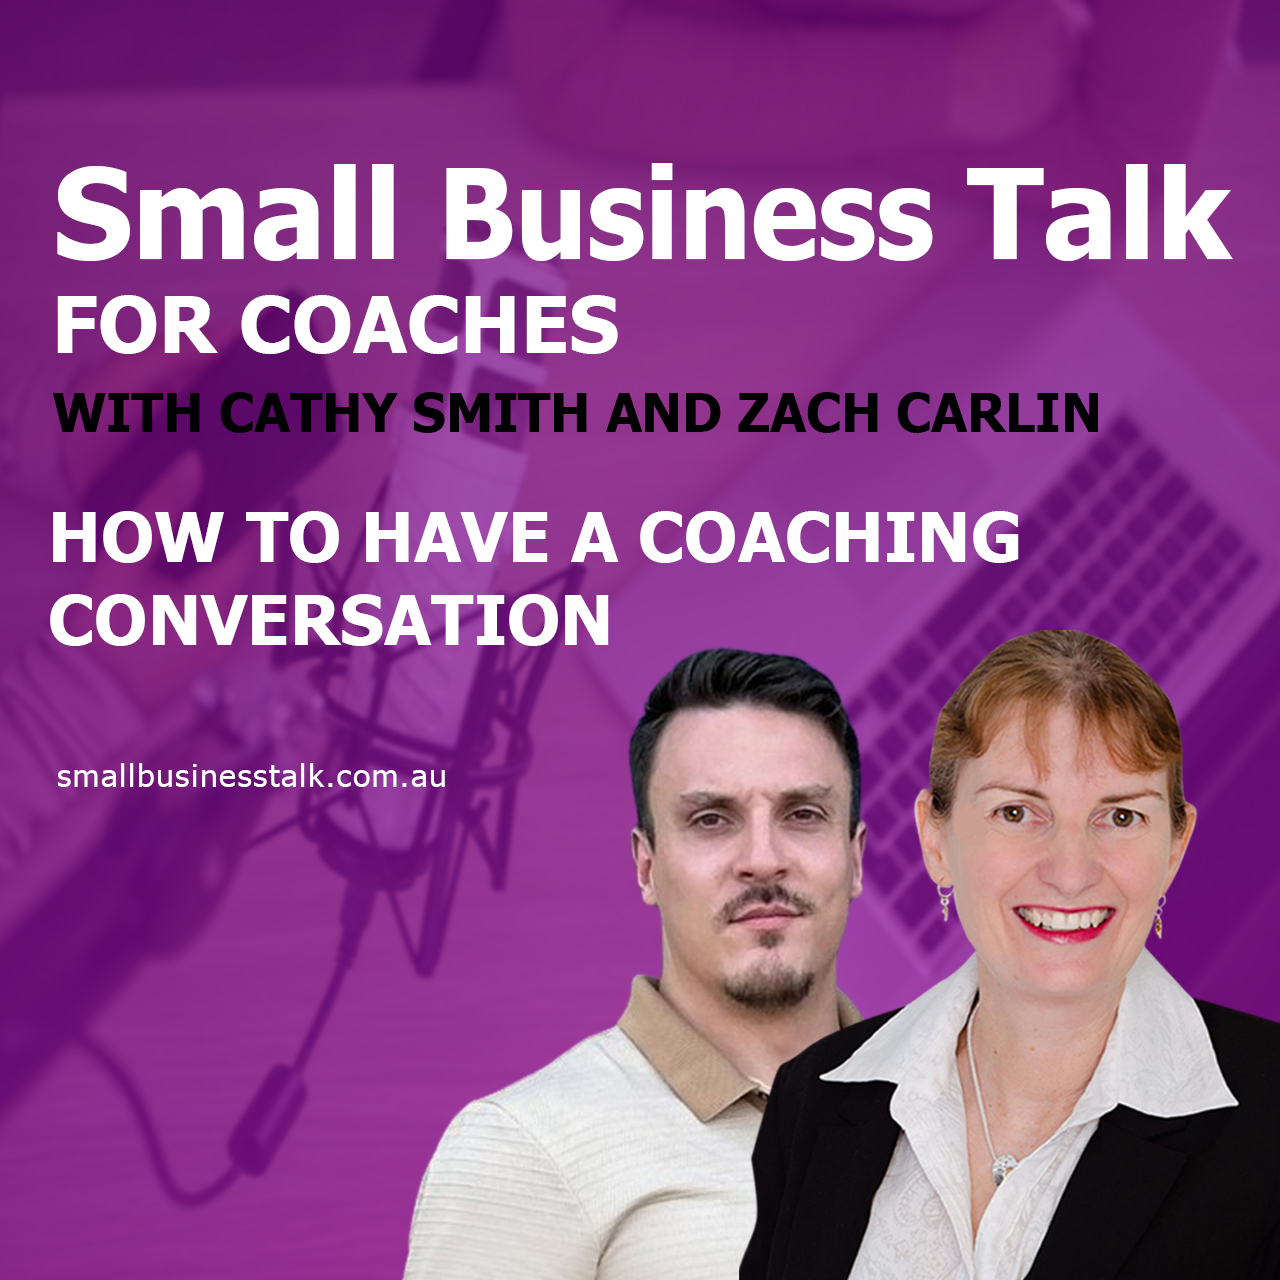 How to Have a Coaching Conversation with Cathy Smith & Zach Carlin